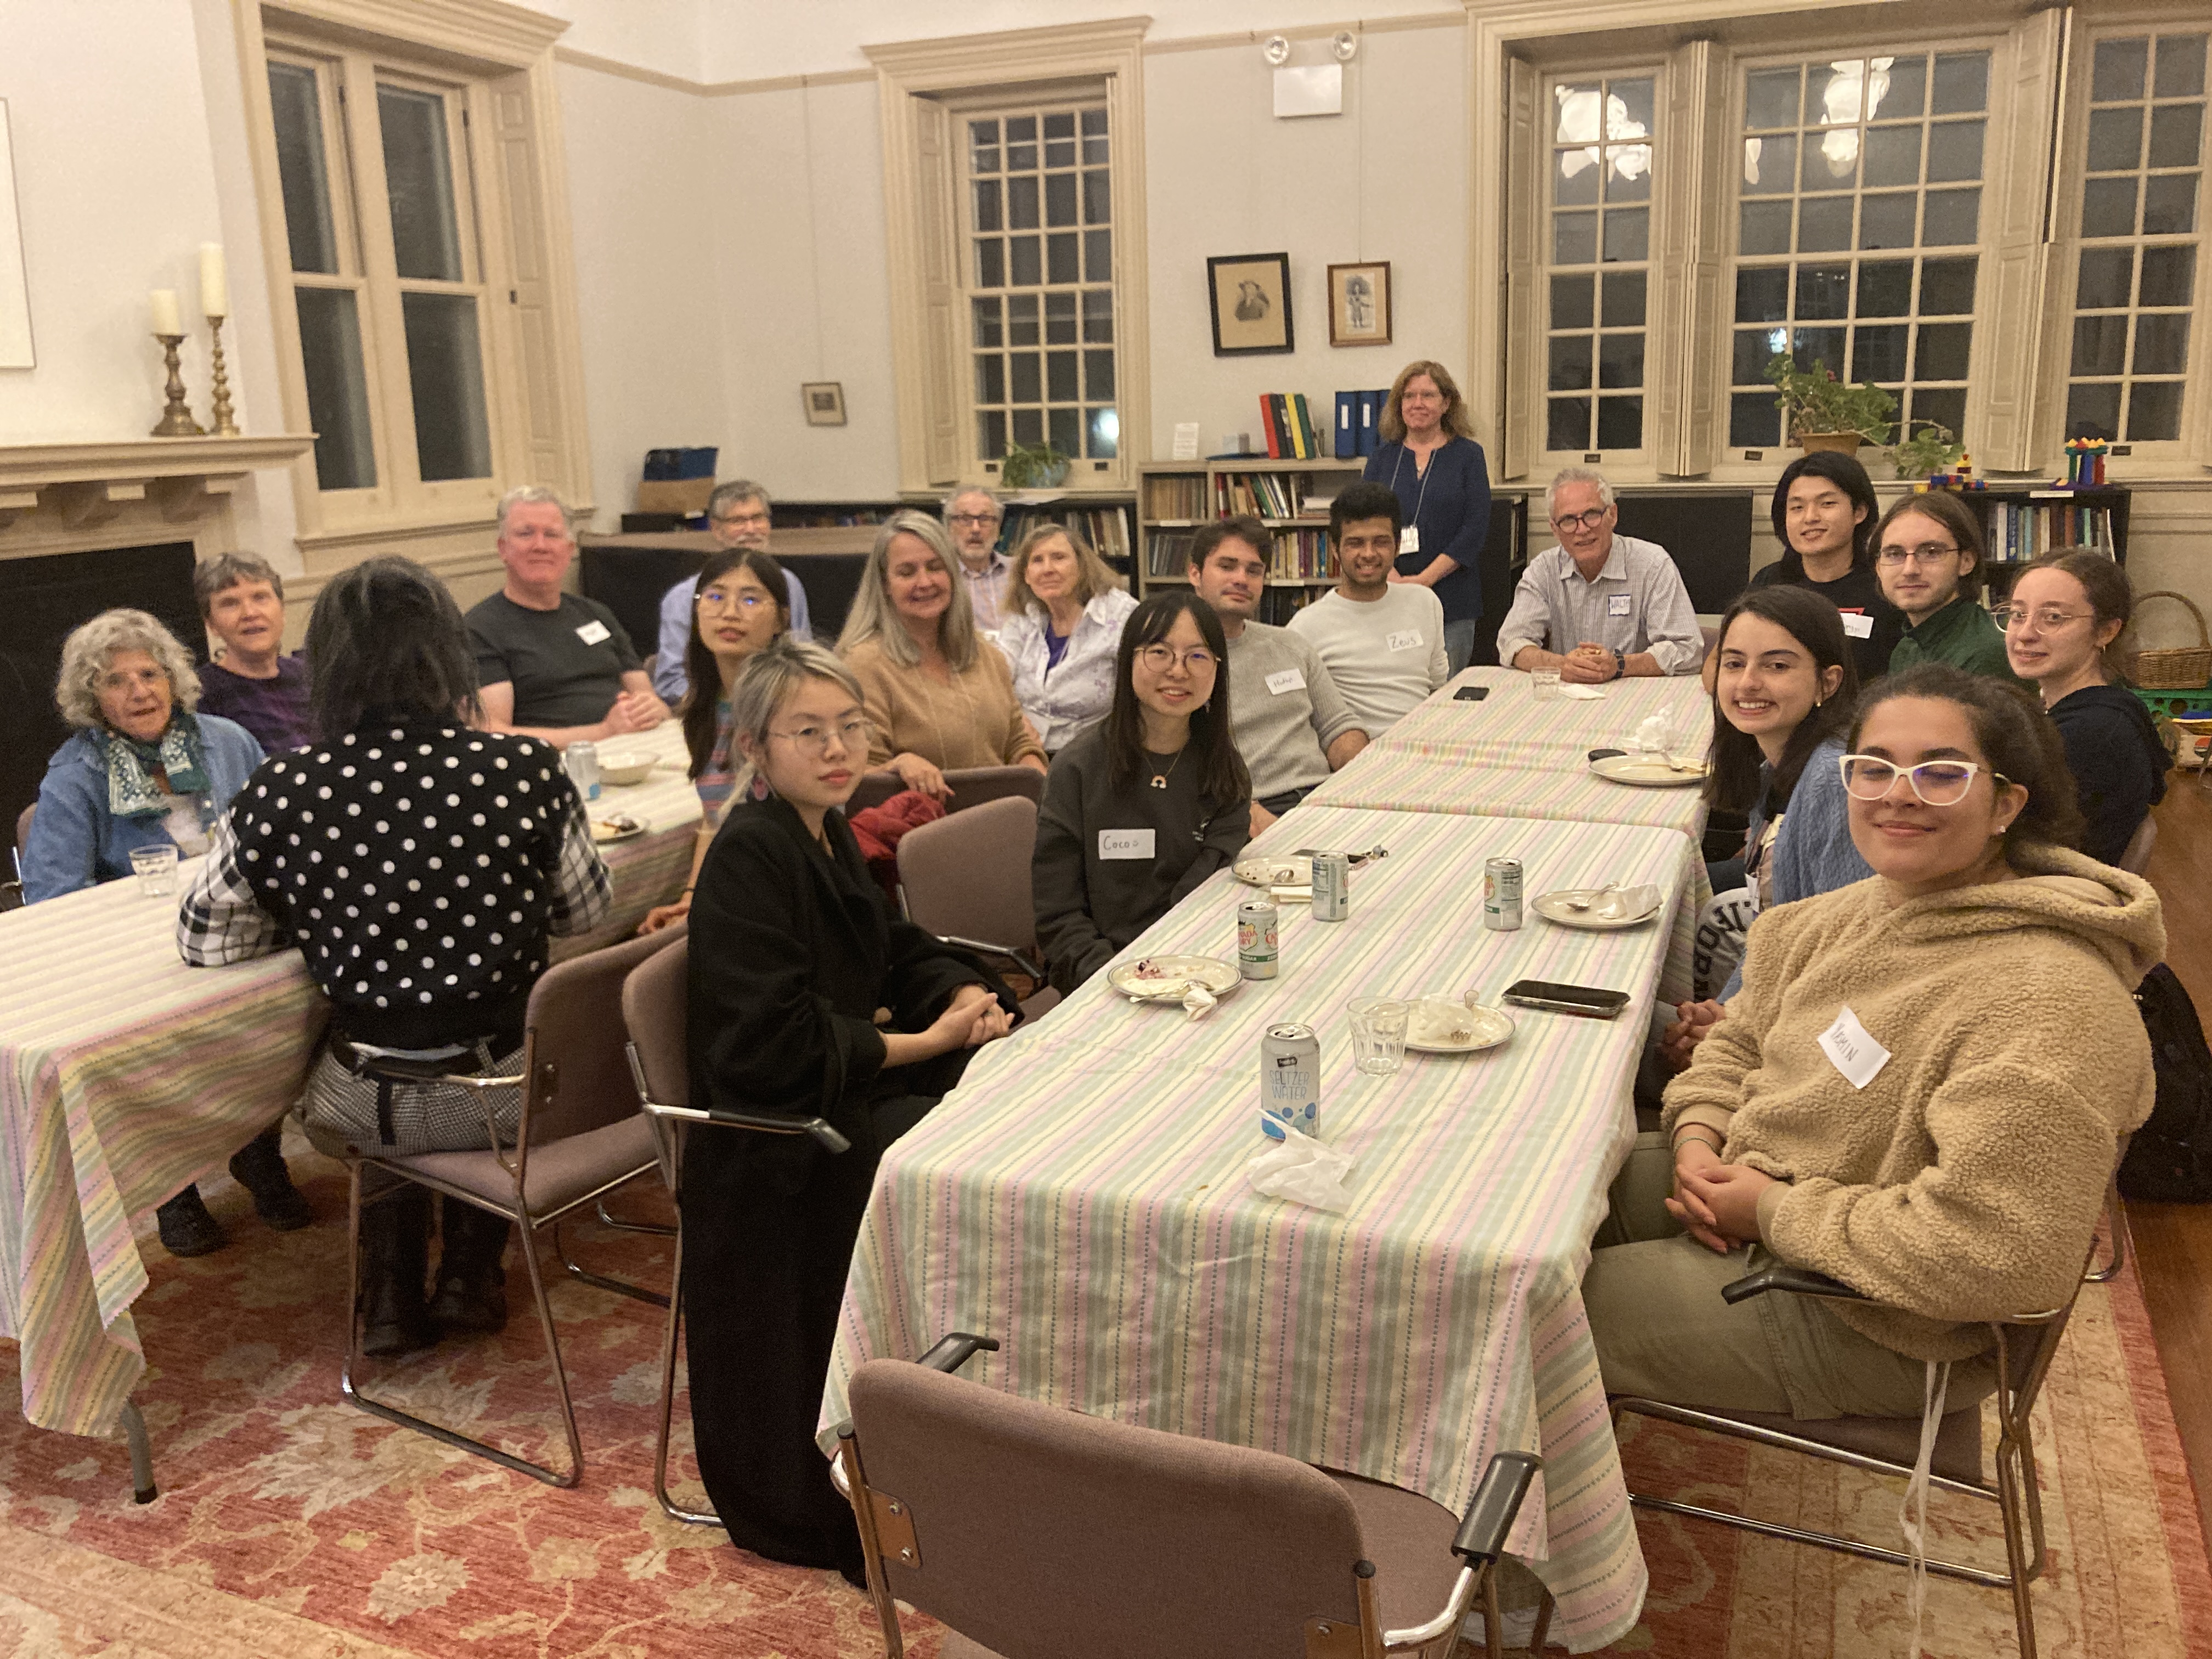 Photo of potluck dinner with Haverford College students and HMM members